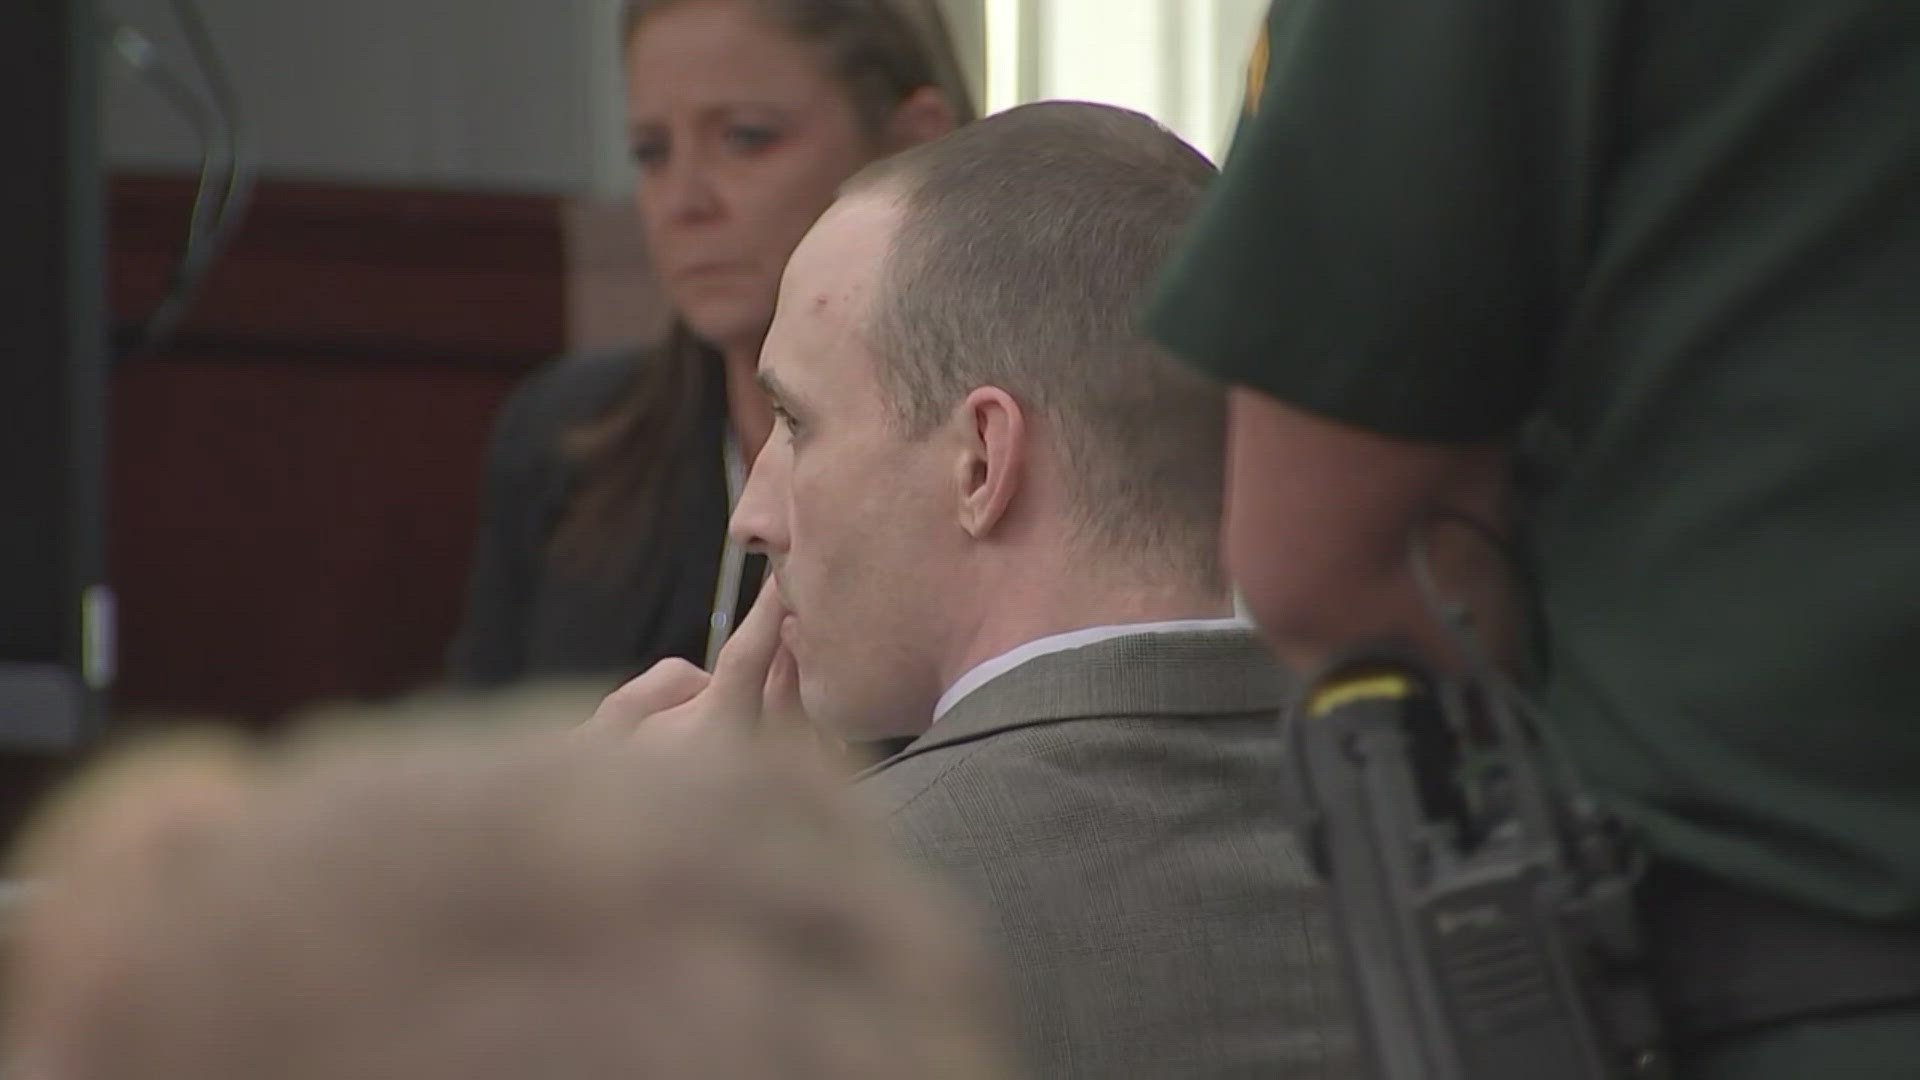 Facing the death penalty in Nassau County, 11 out of 12 jurors voted for McDowell to receive a death sentence.